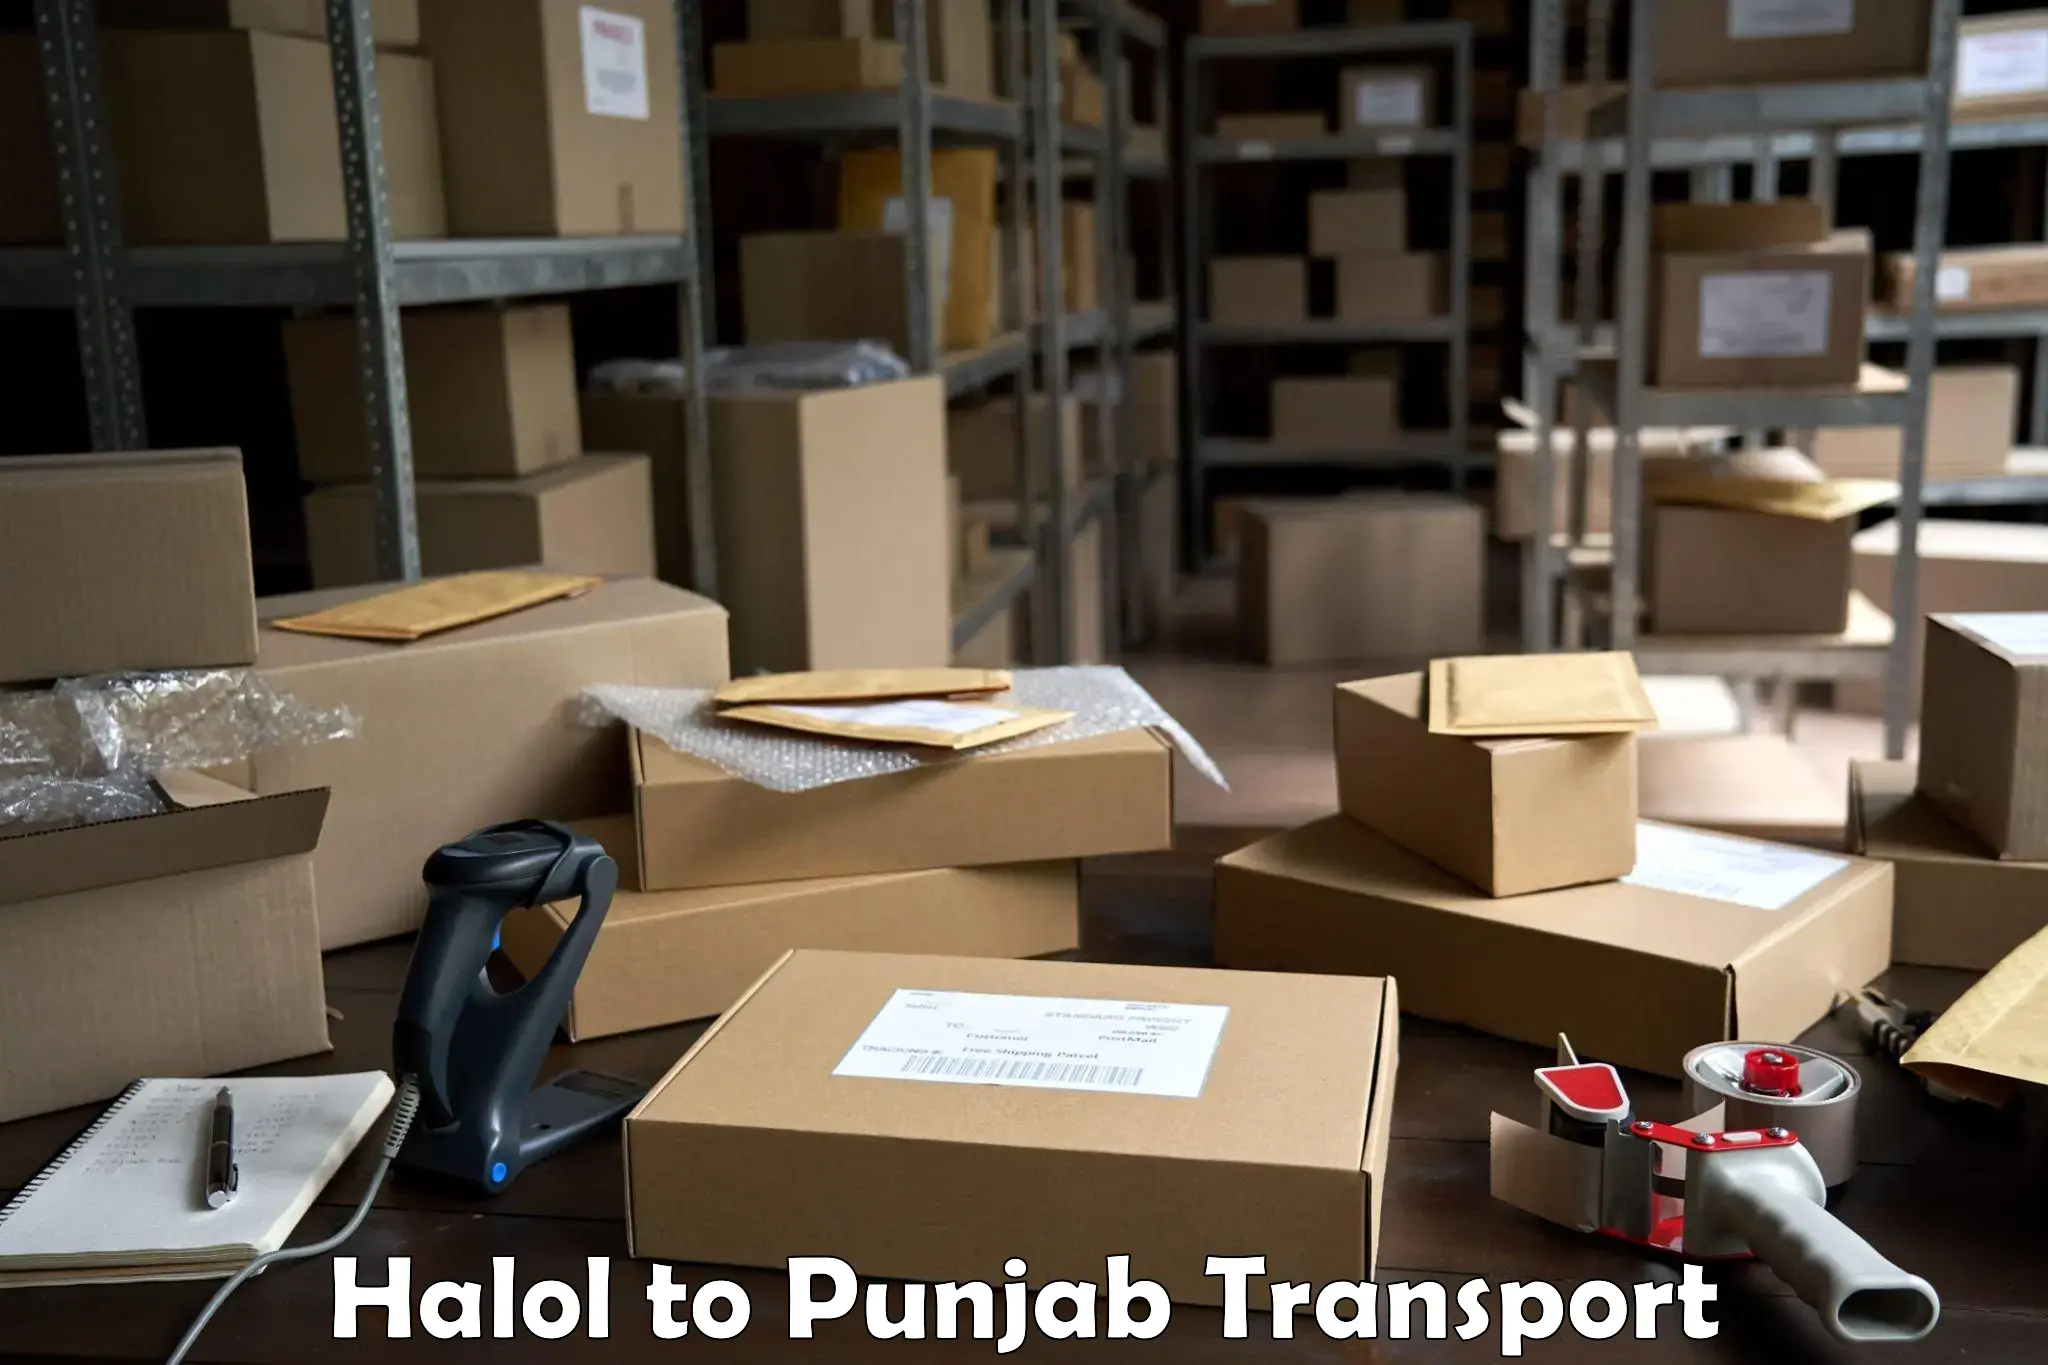 Container transport service Halol to Mohali